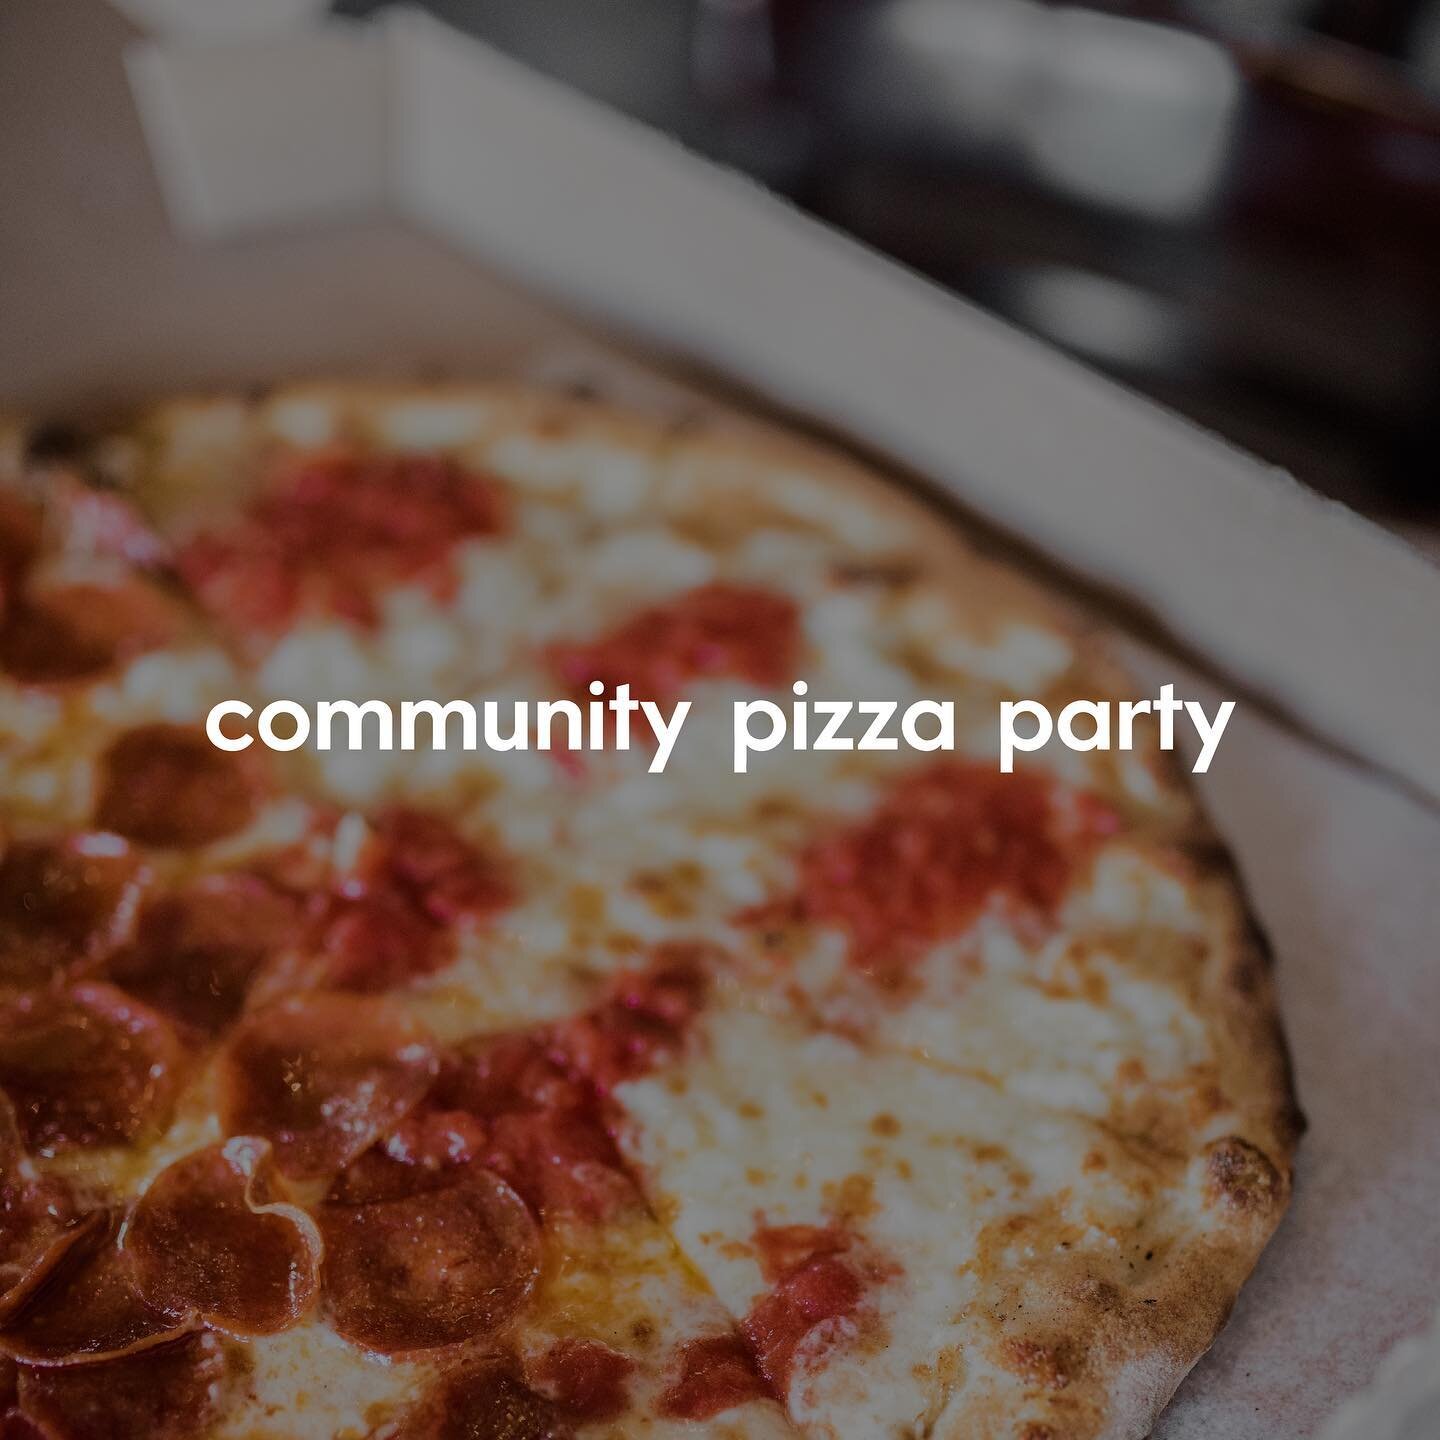 Swipe for details and register at the link in our bio! 

We would love some extra hands for the party in areas like serving pizza and helping with kid games. To find out more or to volunteer, email&nbsp;contact@arestoration.church.